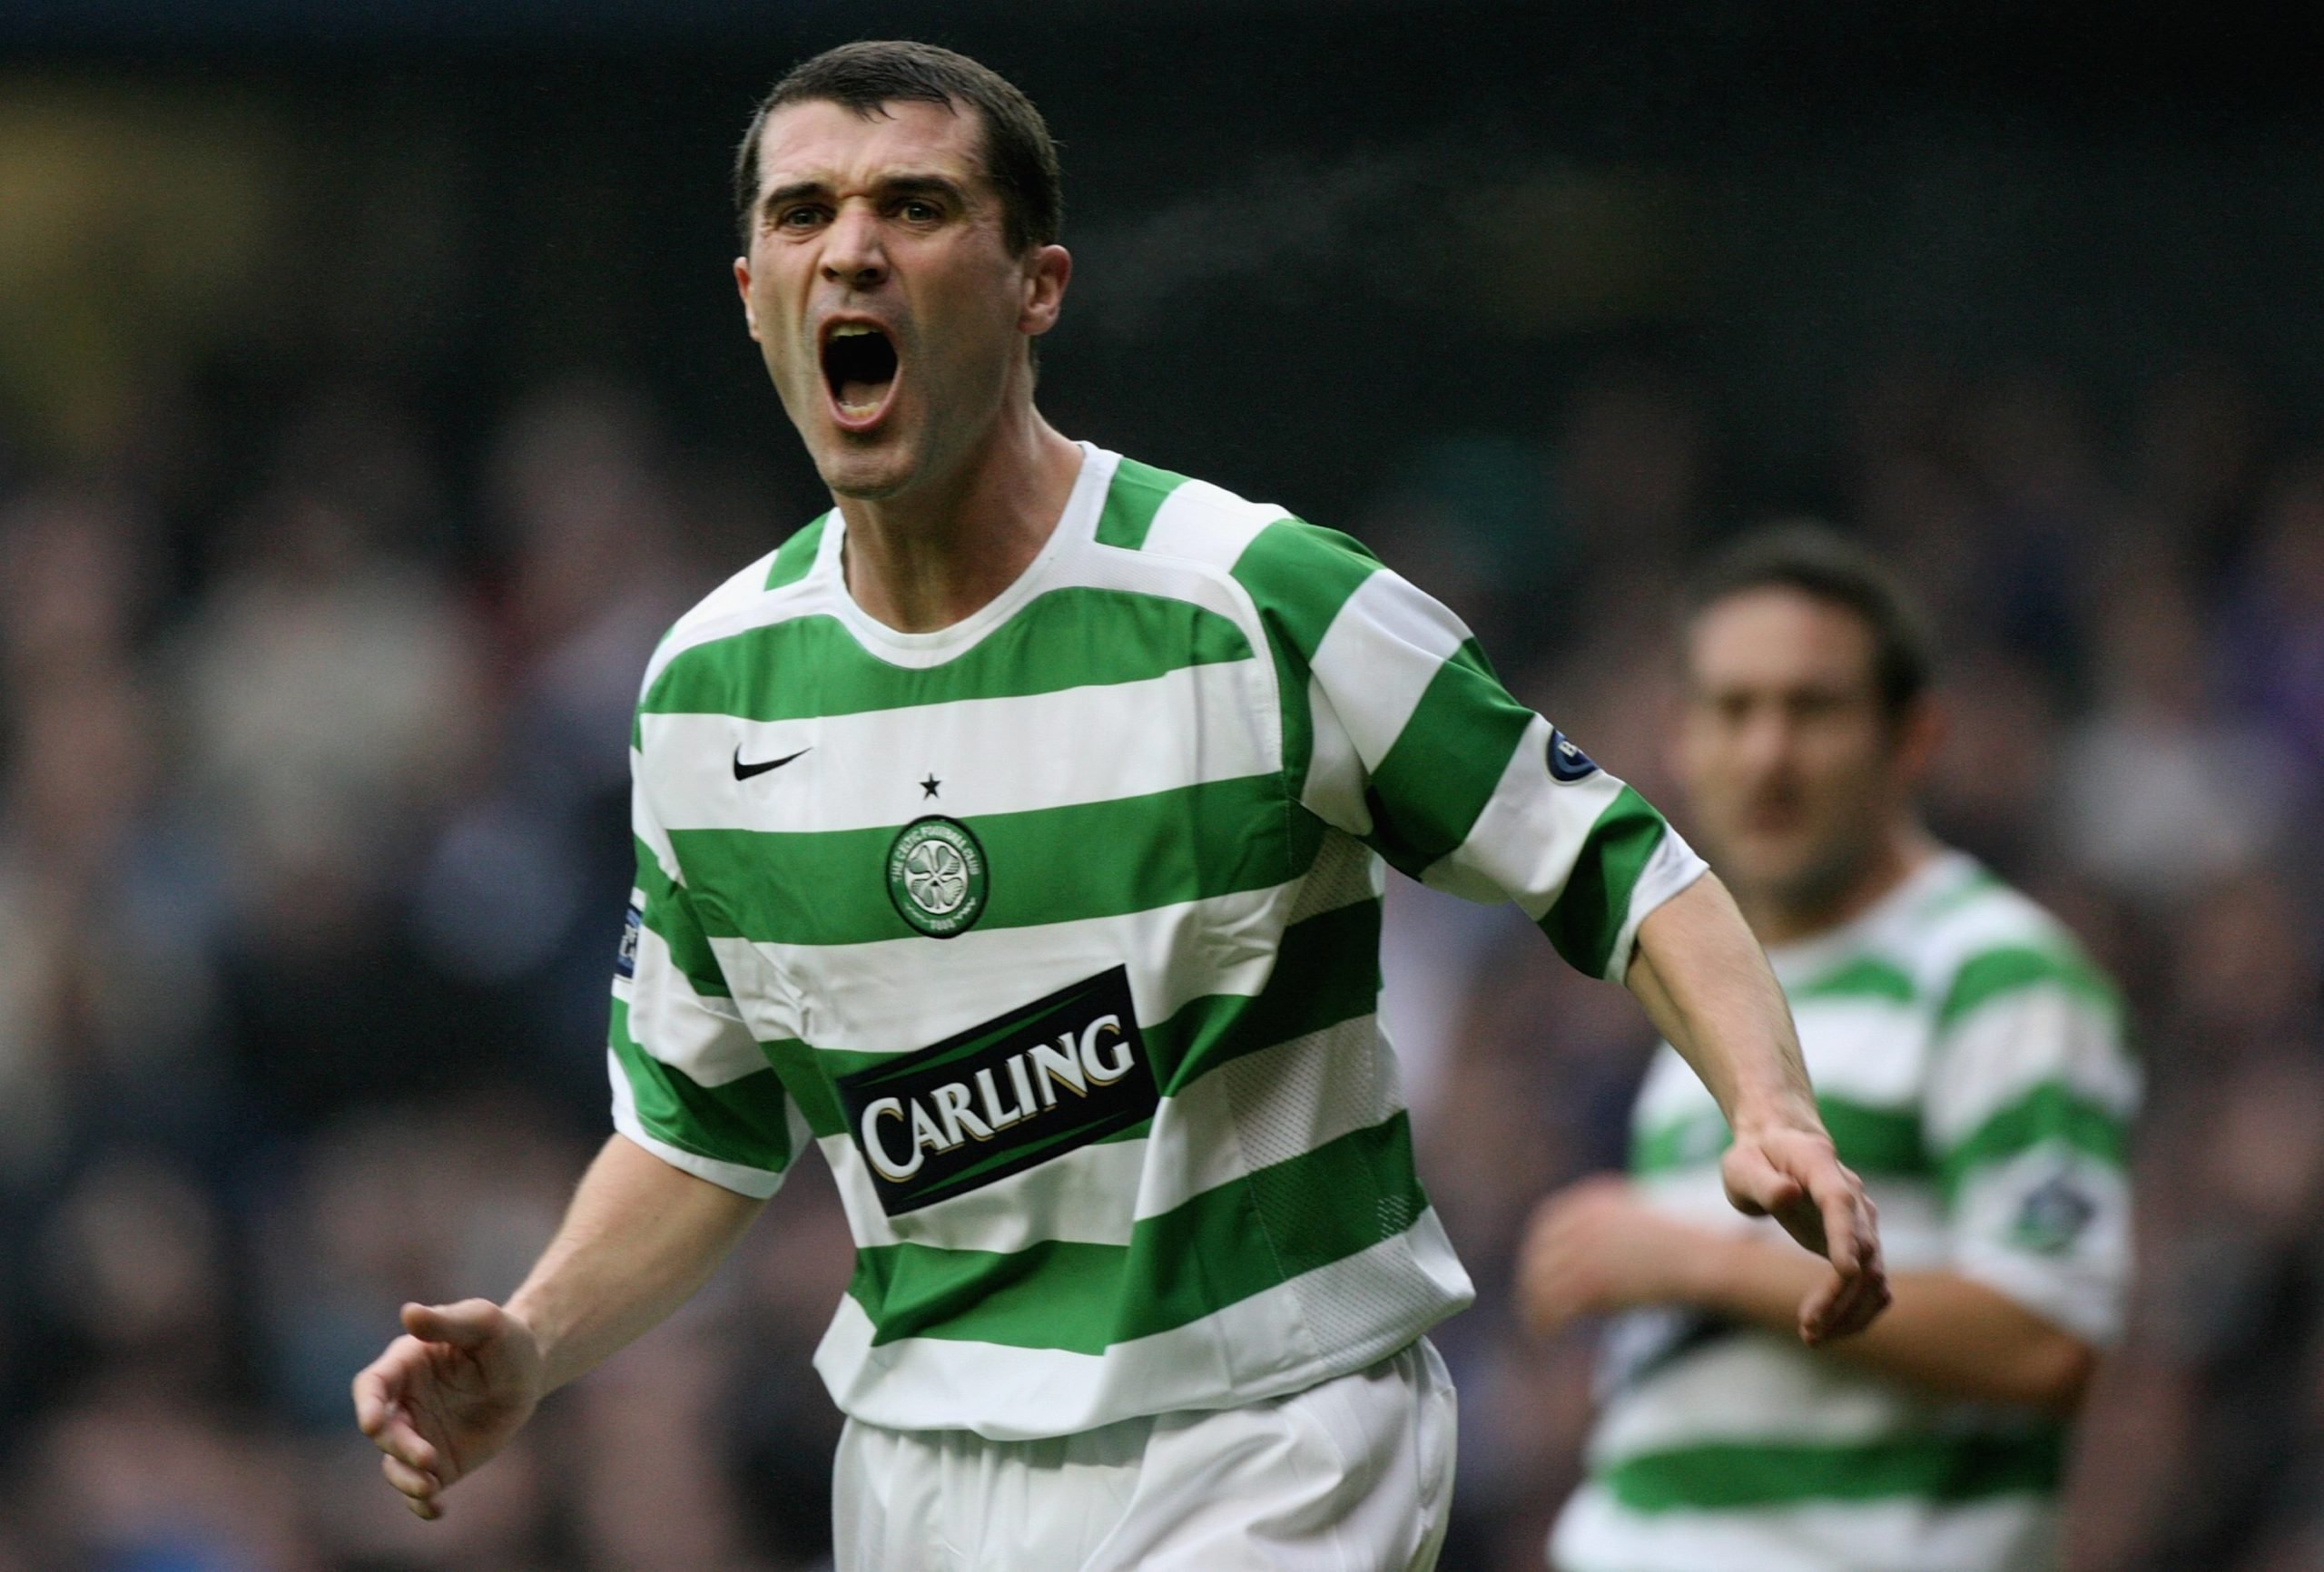 Roy Keane spoke about embarrassing Celtic approach in 2014; this can't be repeated